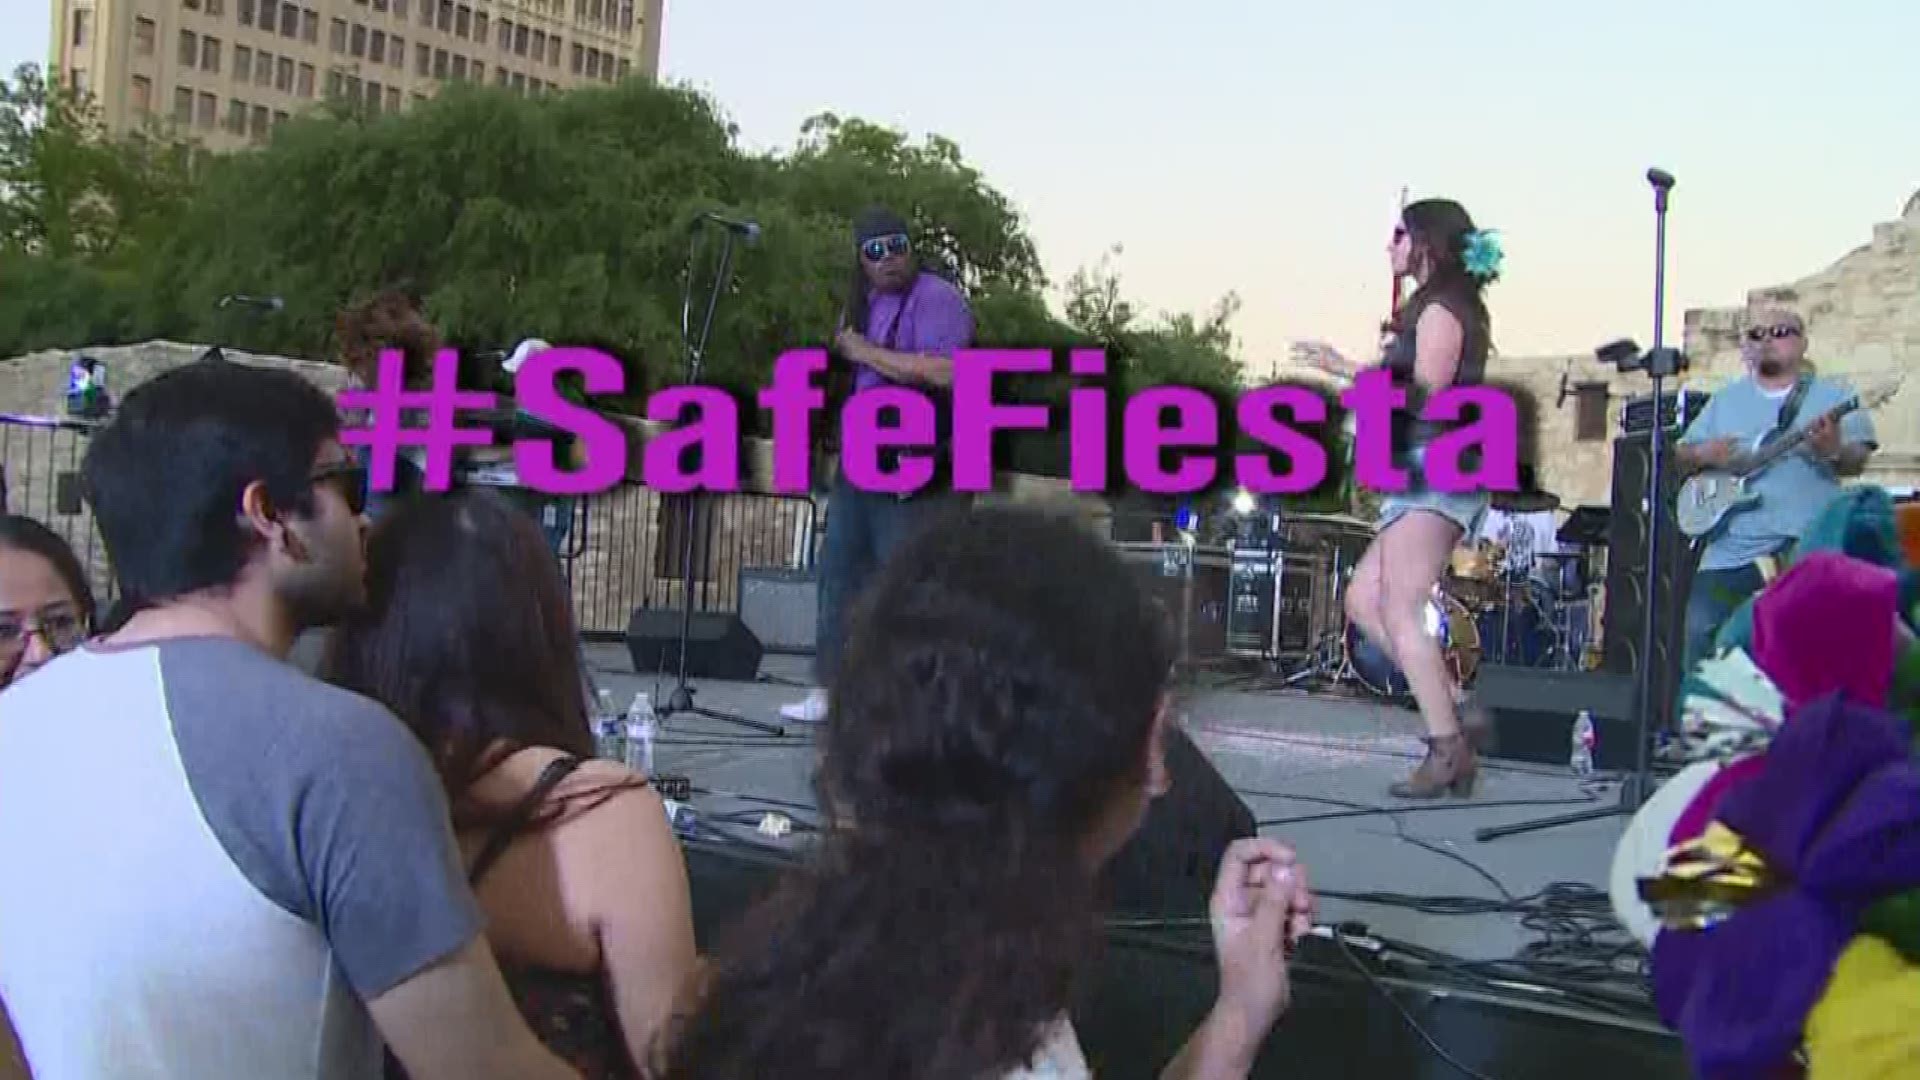 SAPD pushing #SafeFiesta to keep people from drinking and driving